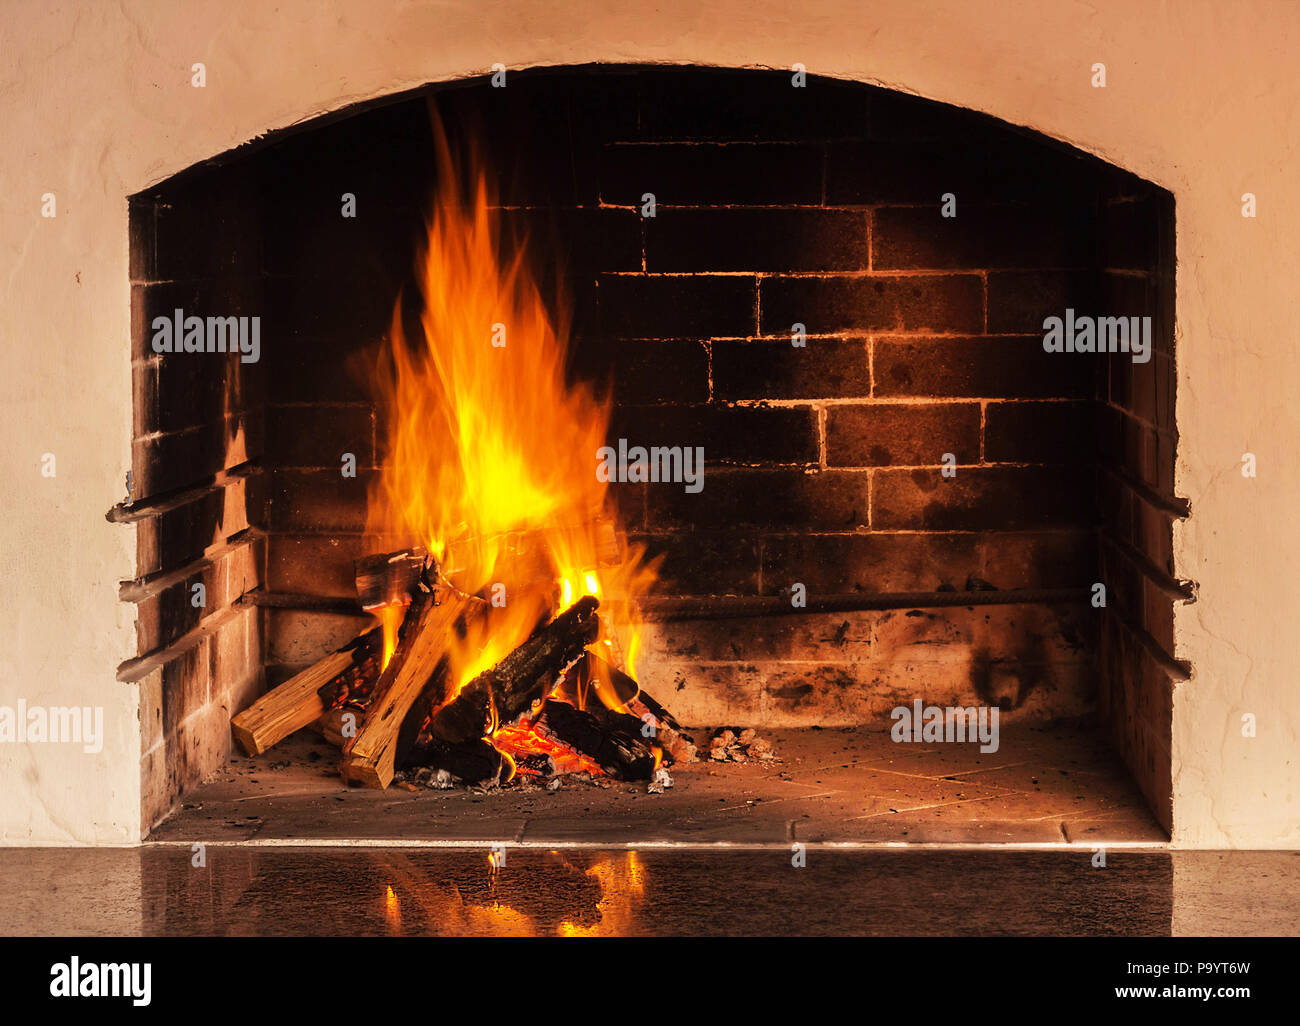 Fire in a home fireplace with reflection on a stone. Evening light Stock Photo